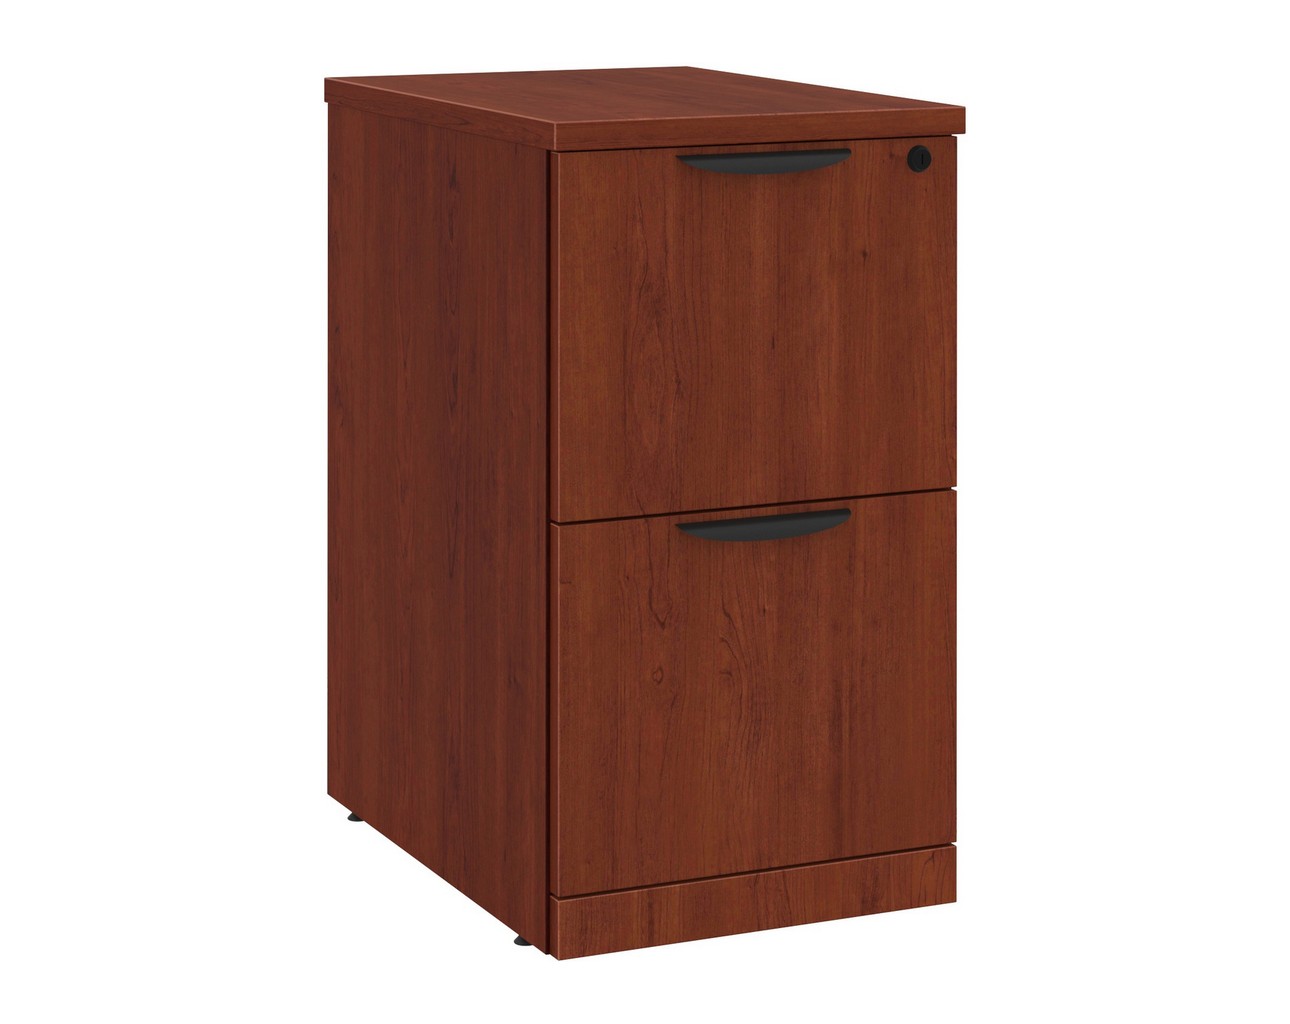 Classic Locking Mobile Pedestals – 2 Drawer in Cherry